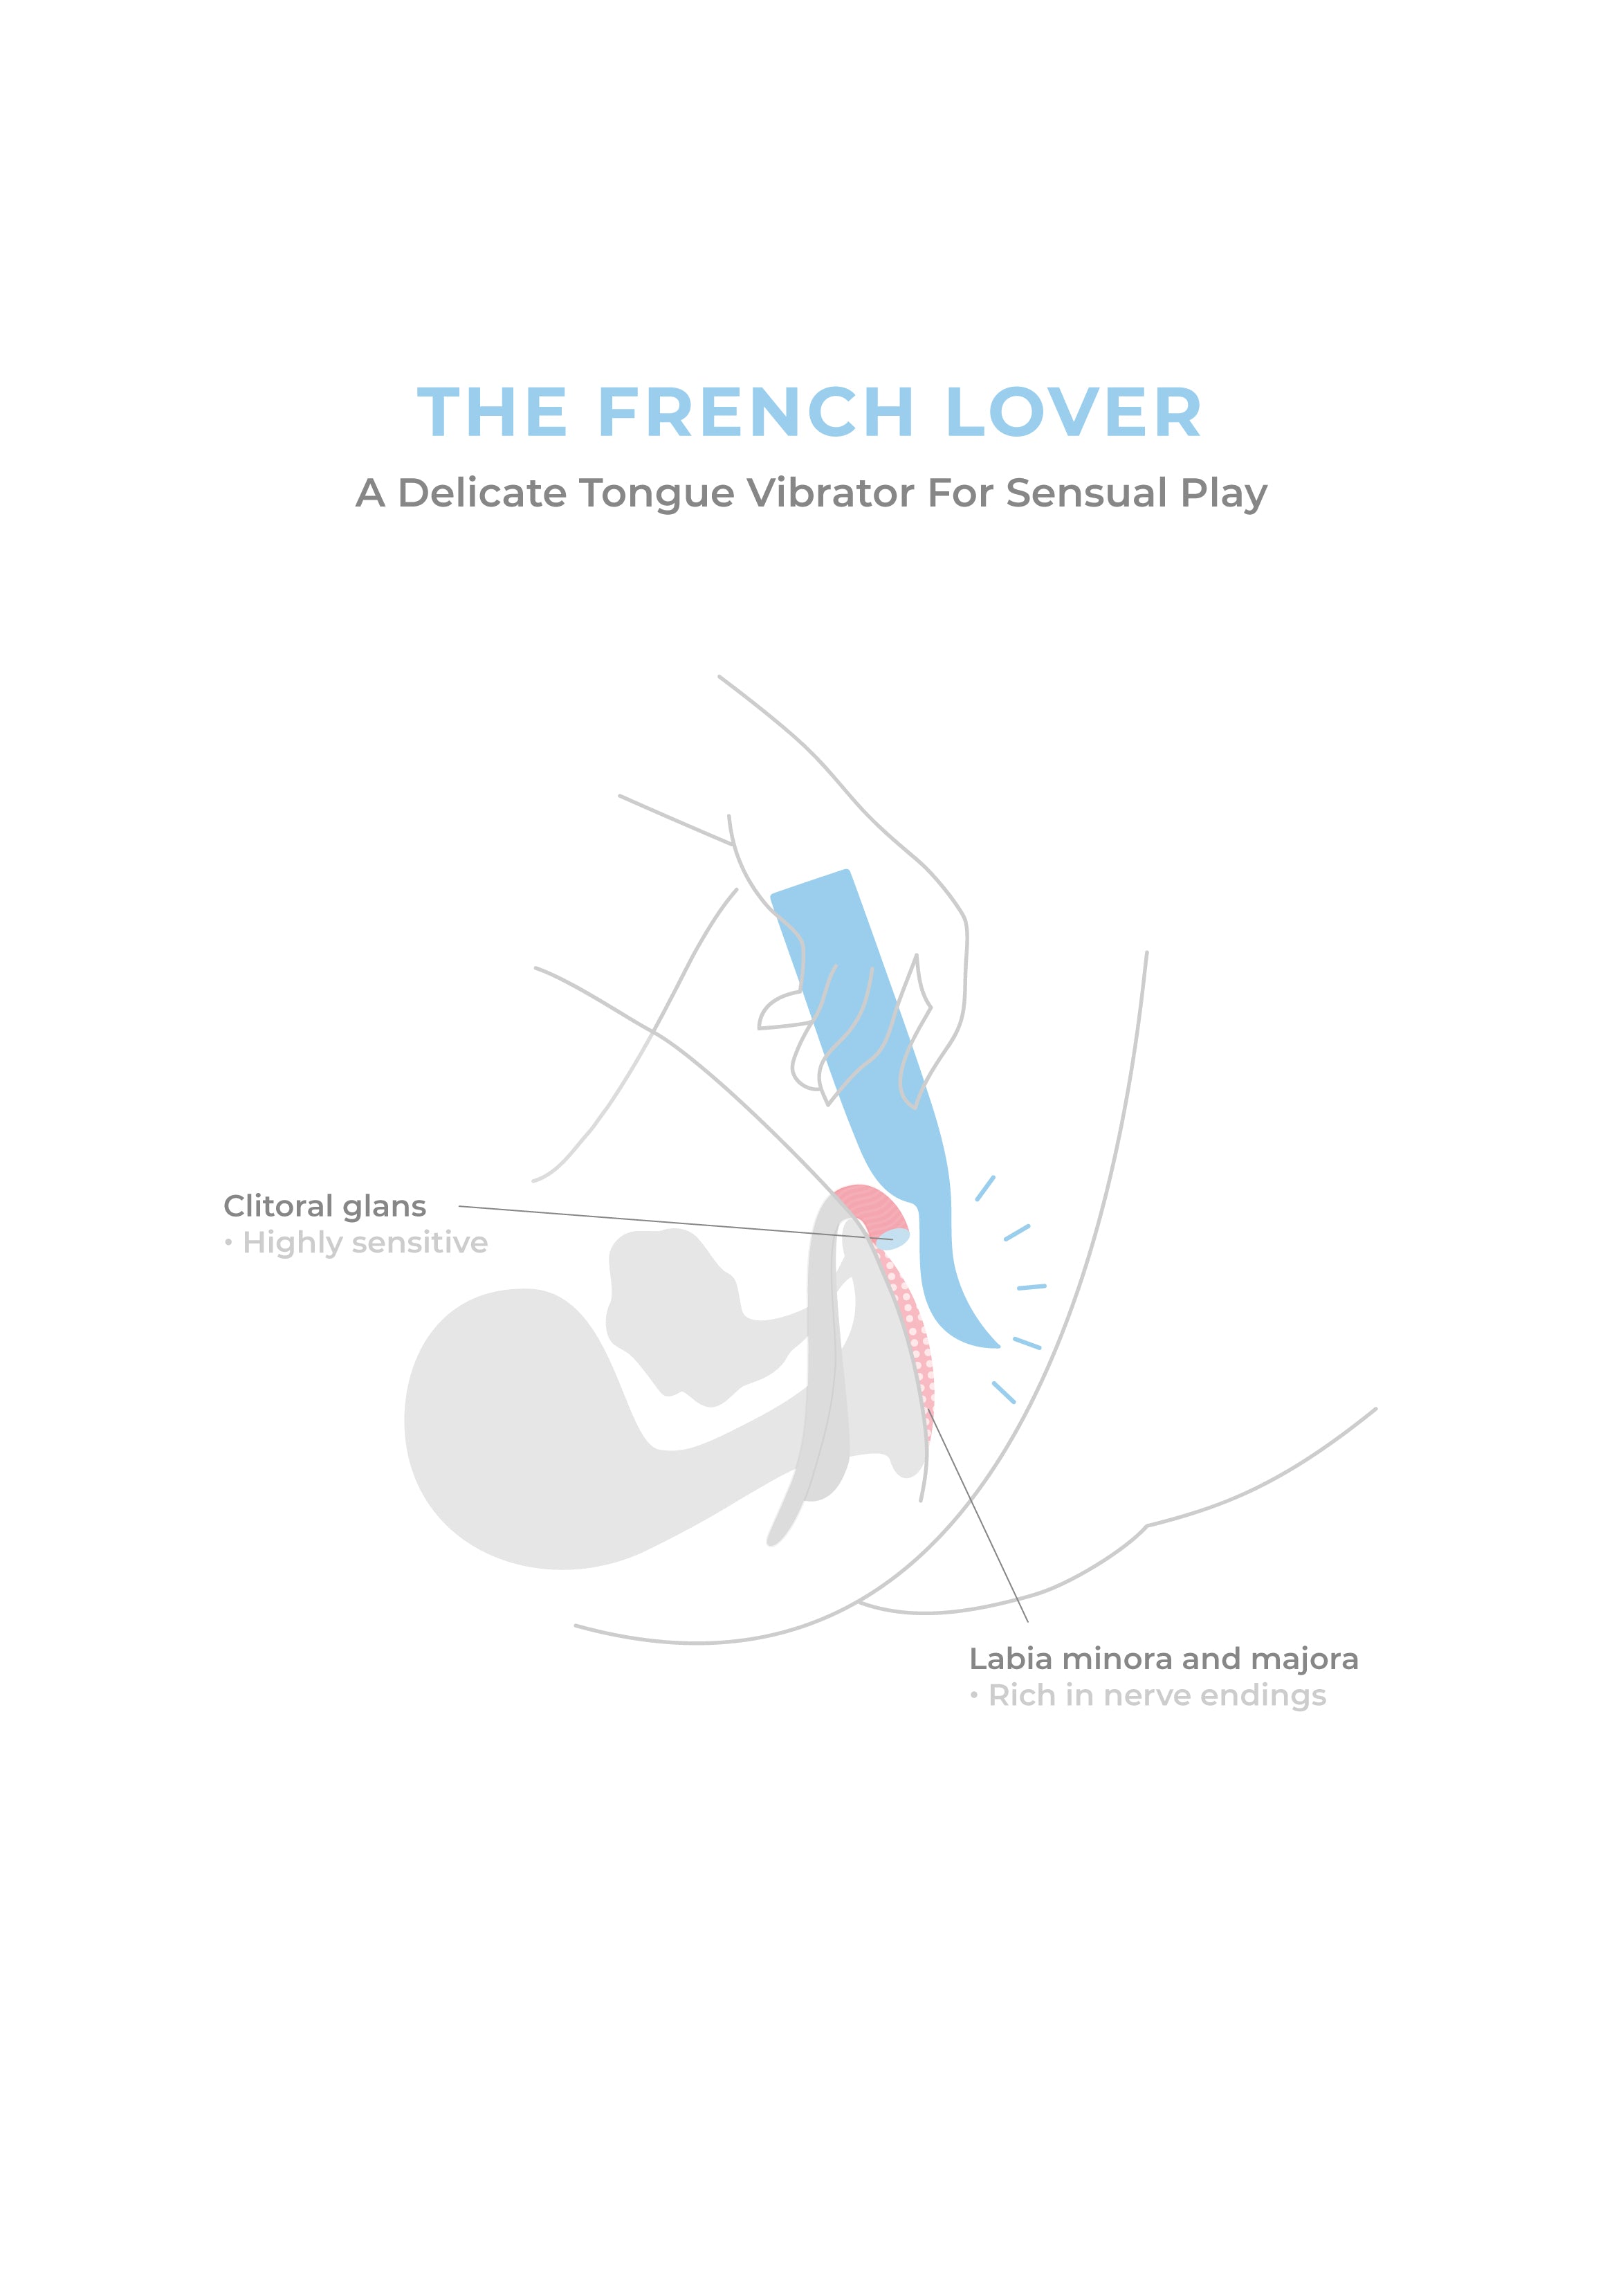 The French Lover, sex toy with vibrating tongue - Smile Makers